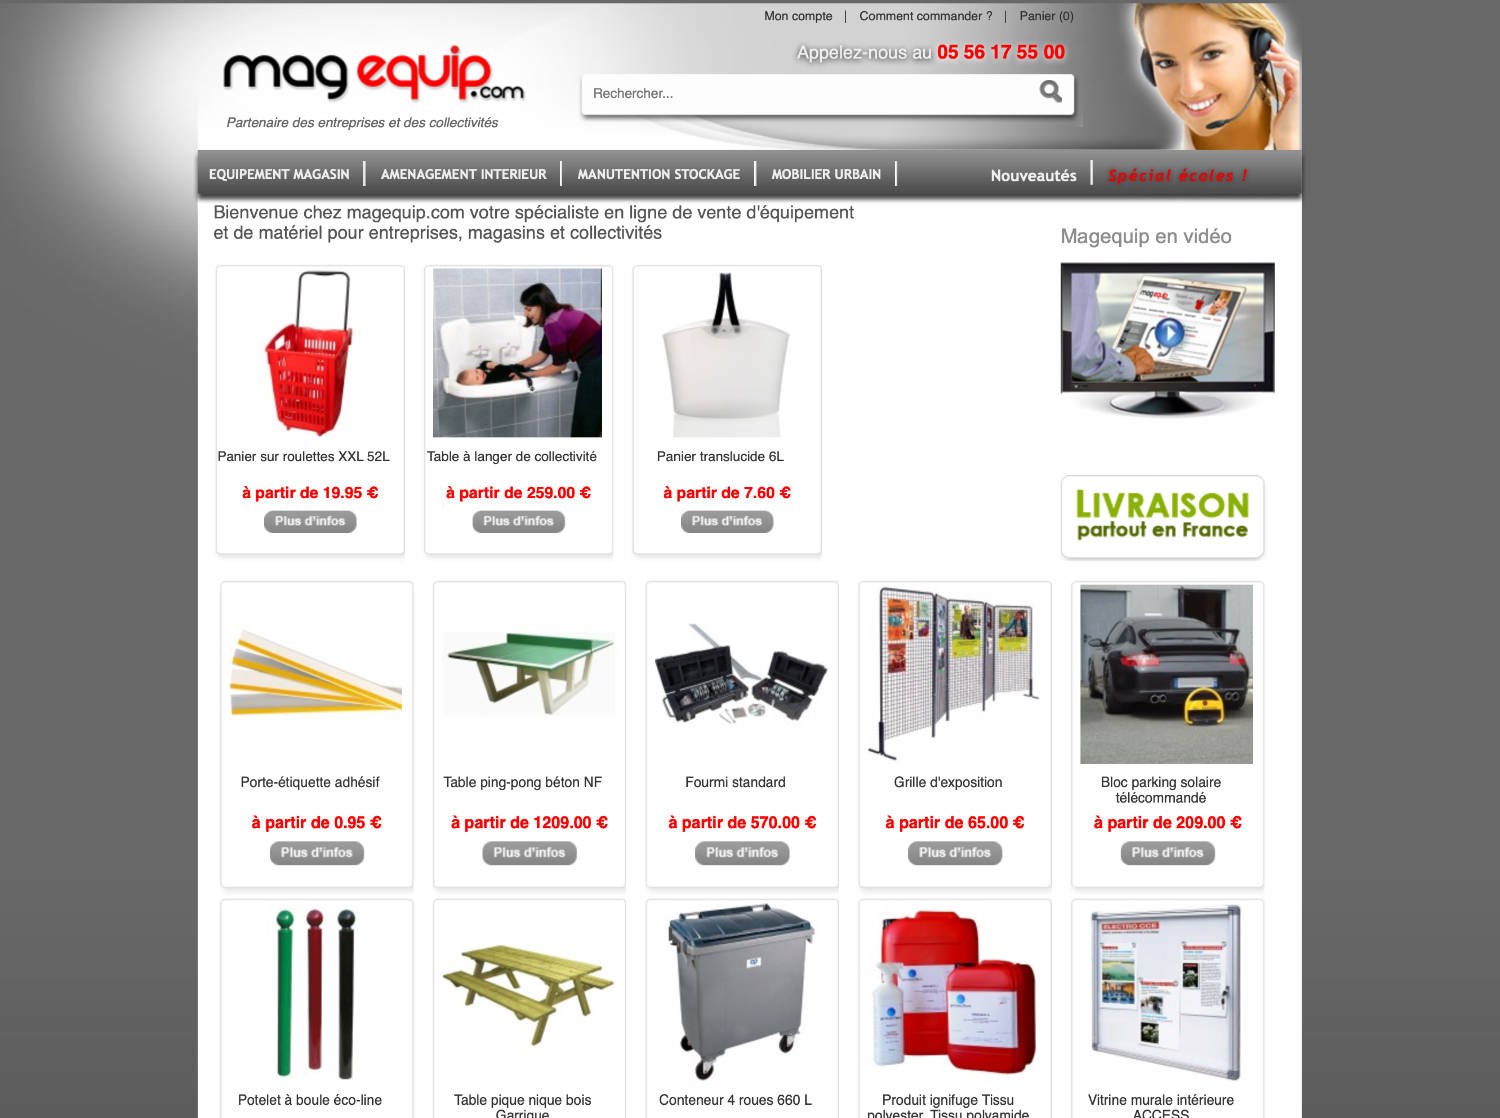 Site Magento Commerce vente chaussures